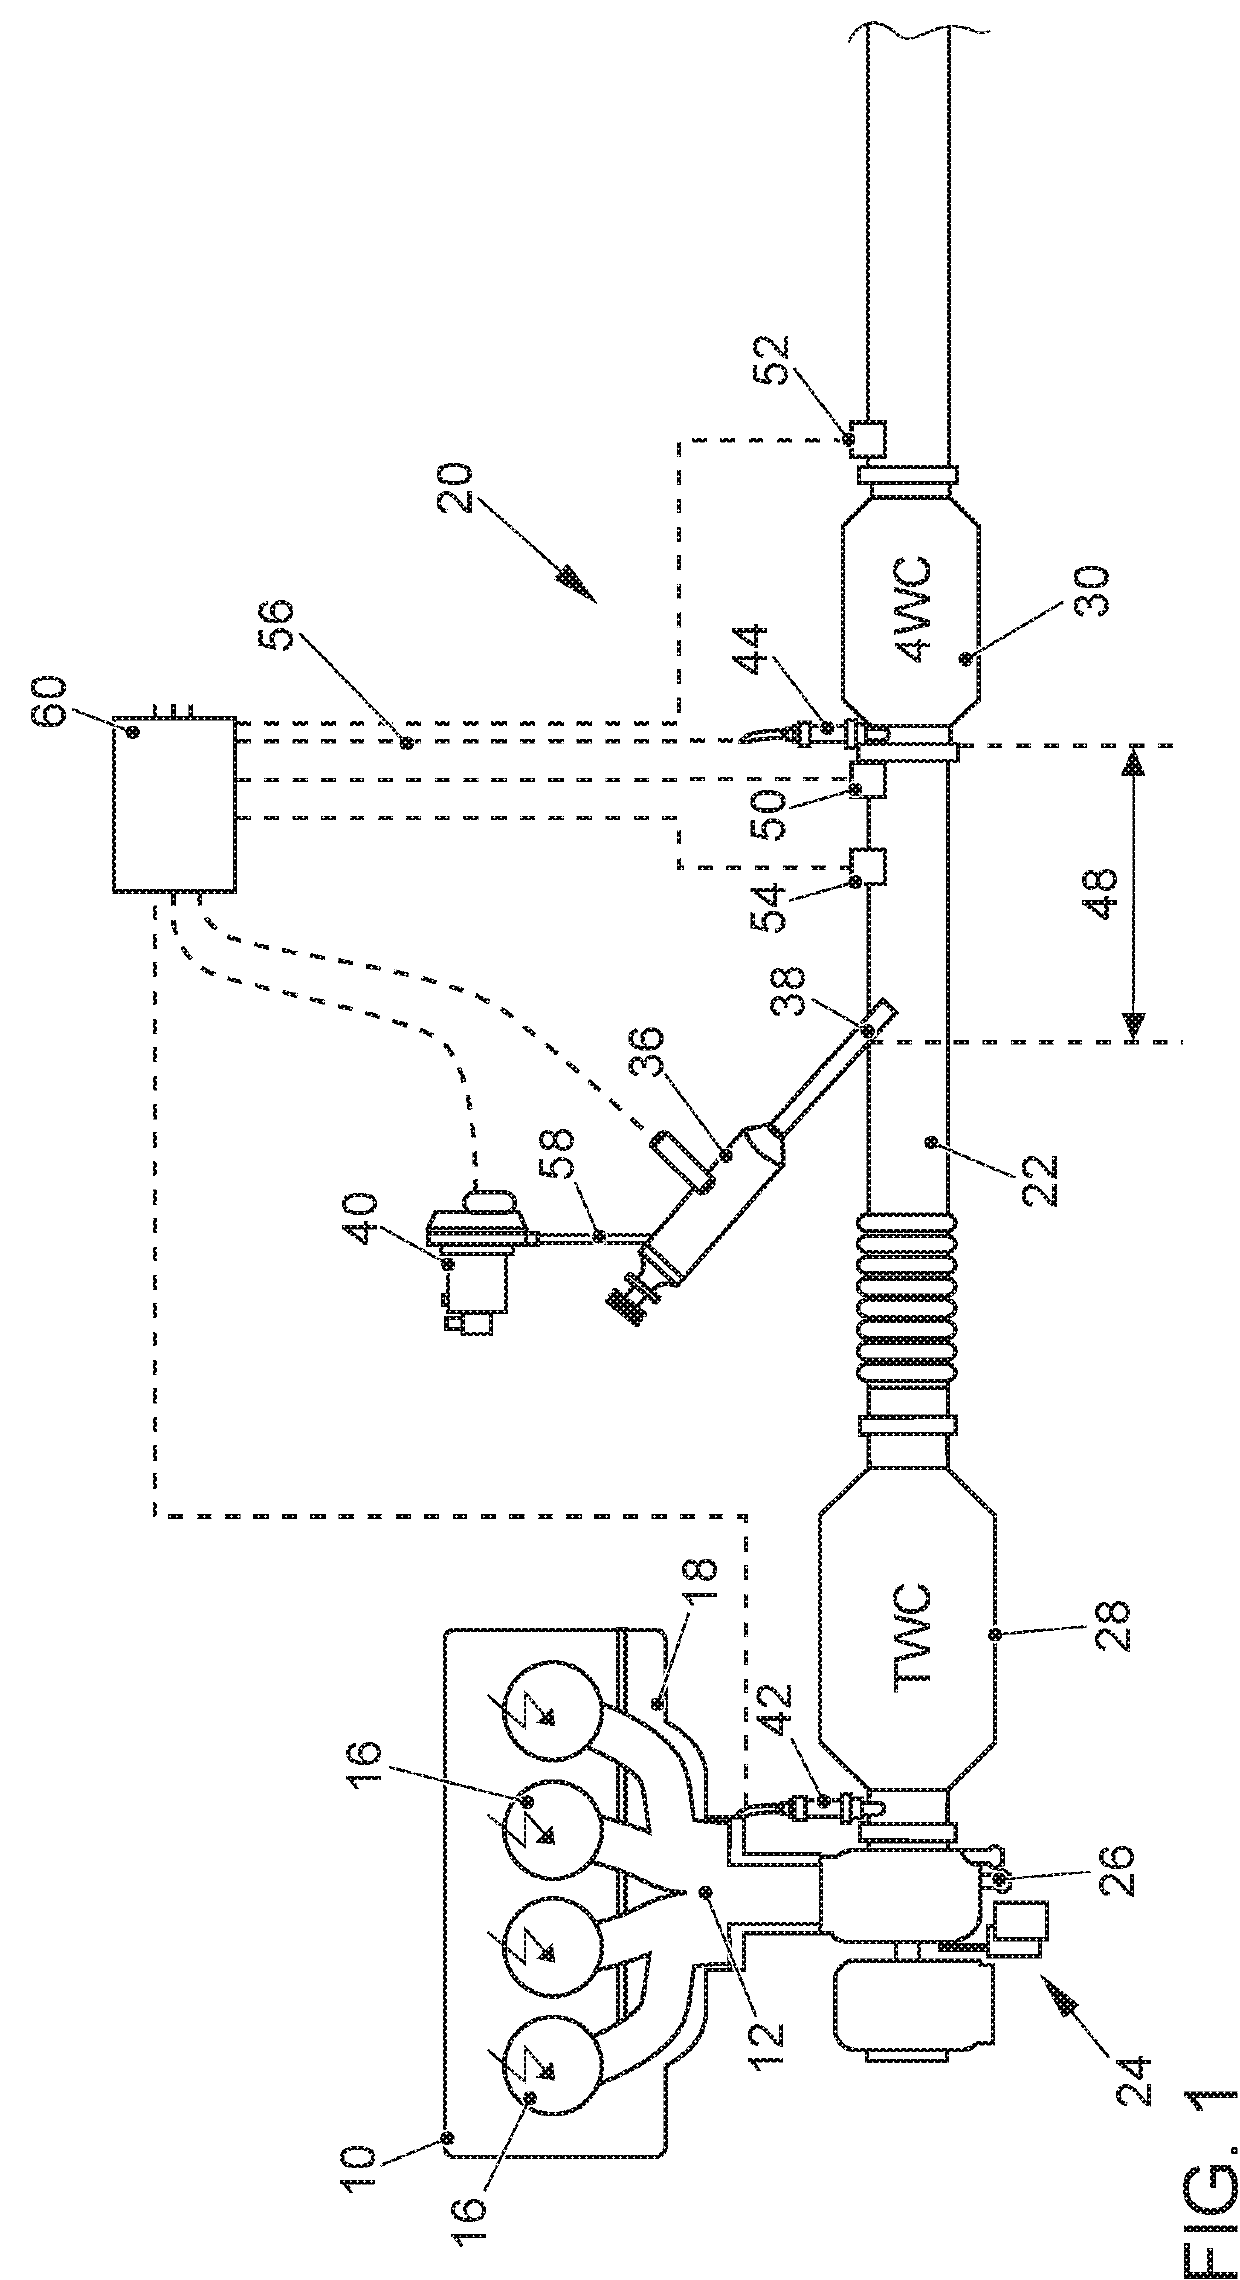 Exhaust gas aftertreatment system and method for exhaust aftertreatment of an internal combustion engine